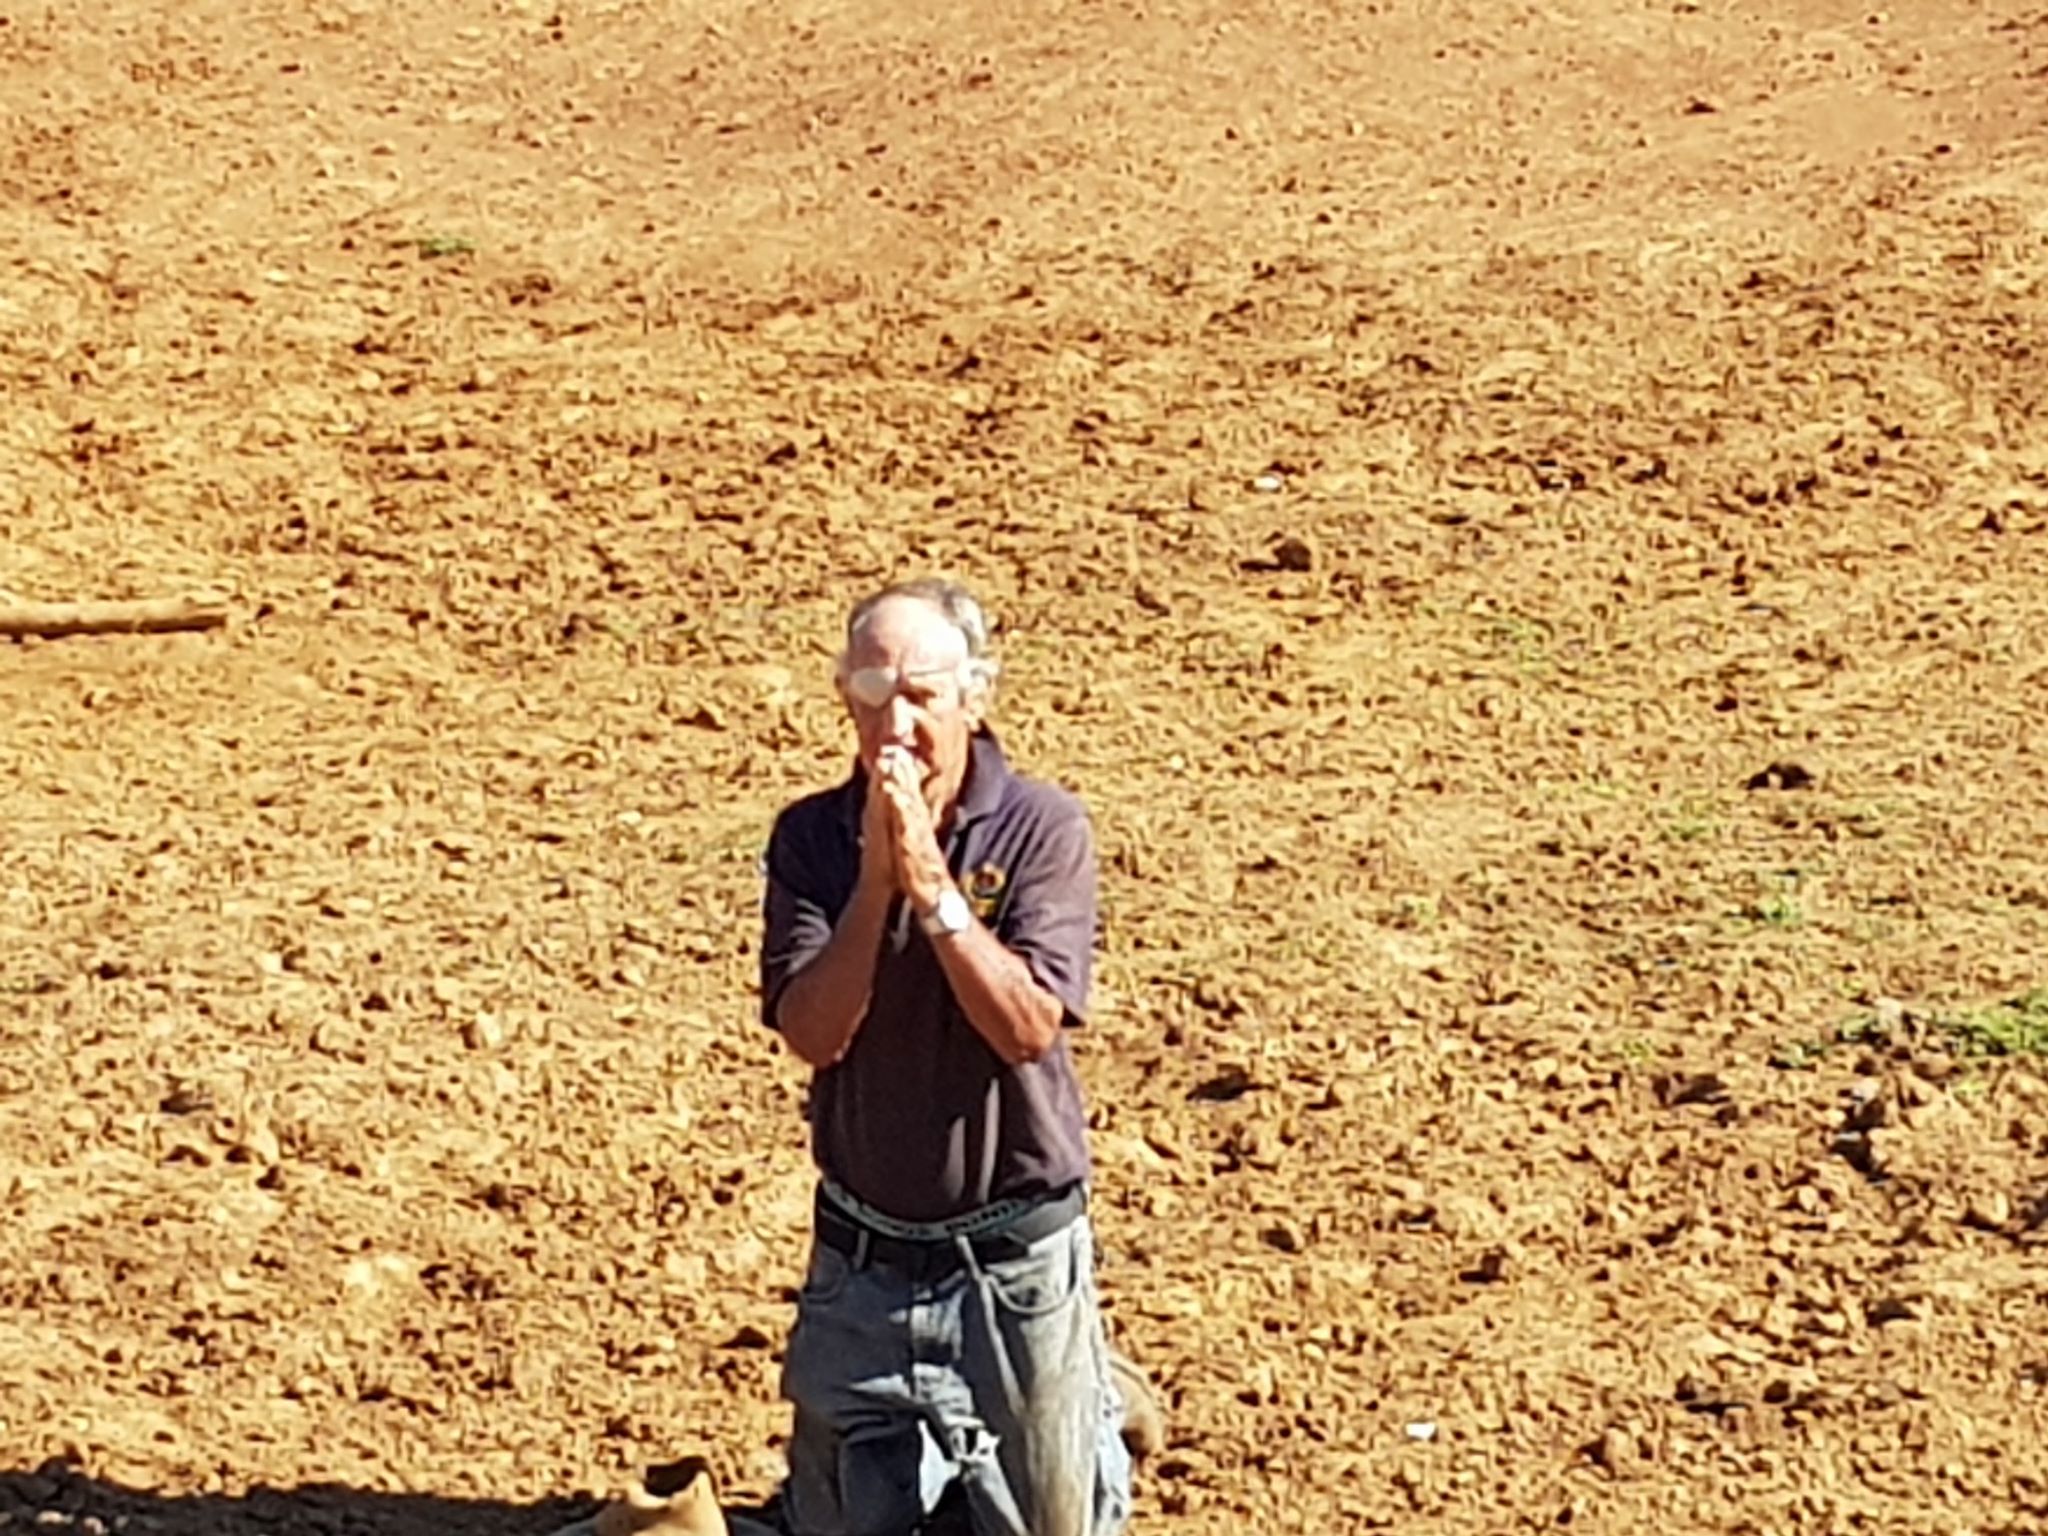 November 2018 Alf King was photographed praying for rain in a dry dam. 